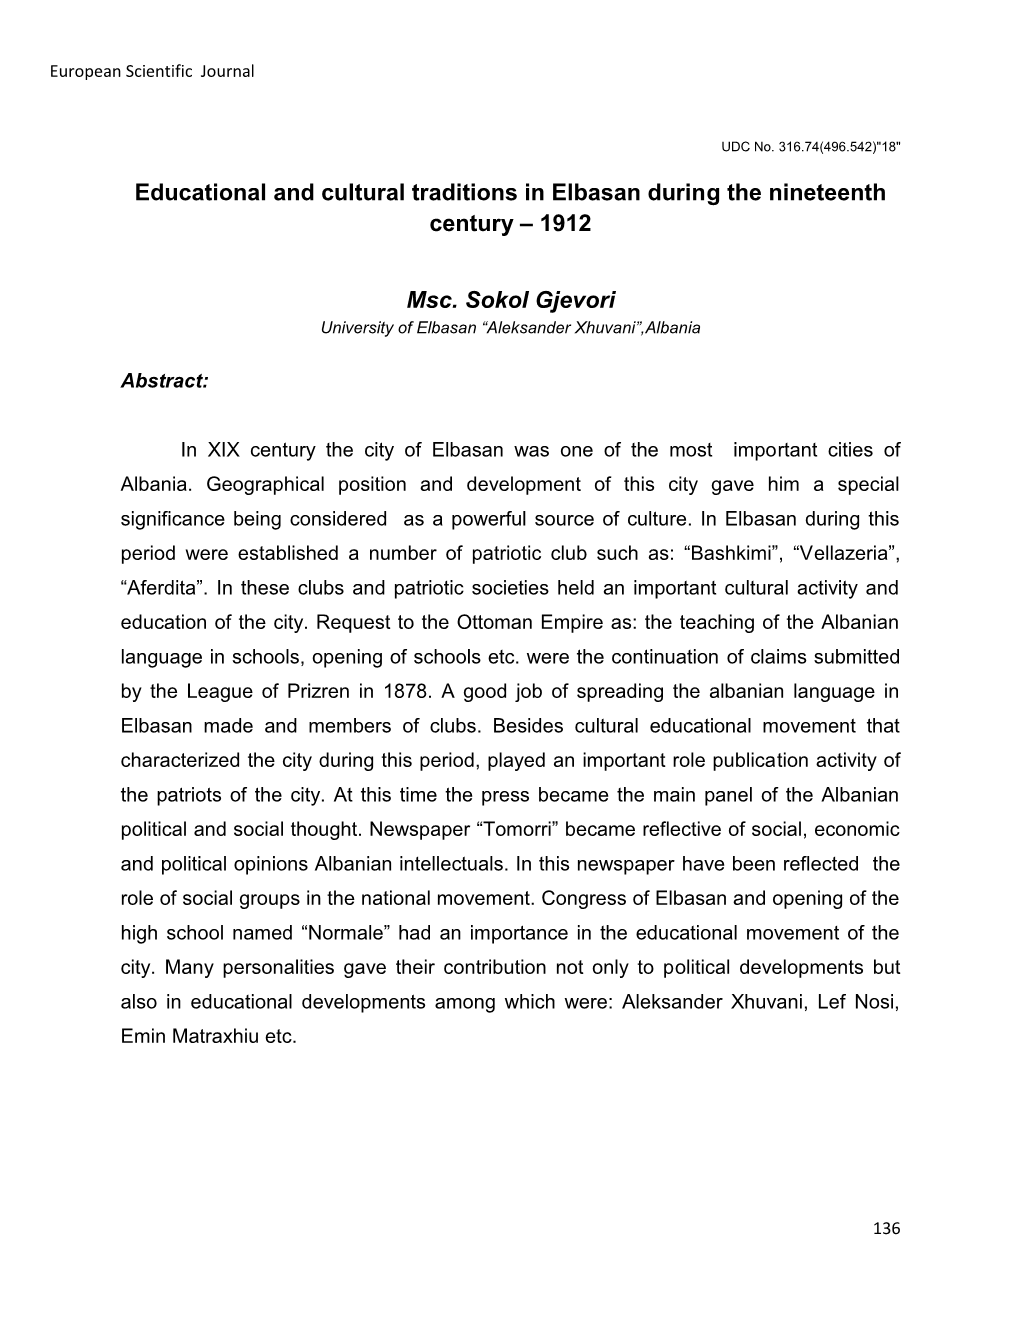 Educational and Cultural Traditions in Elbasan During the Nineteenth Century – 1912